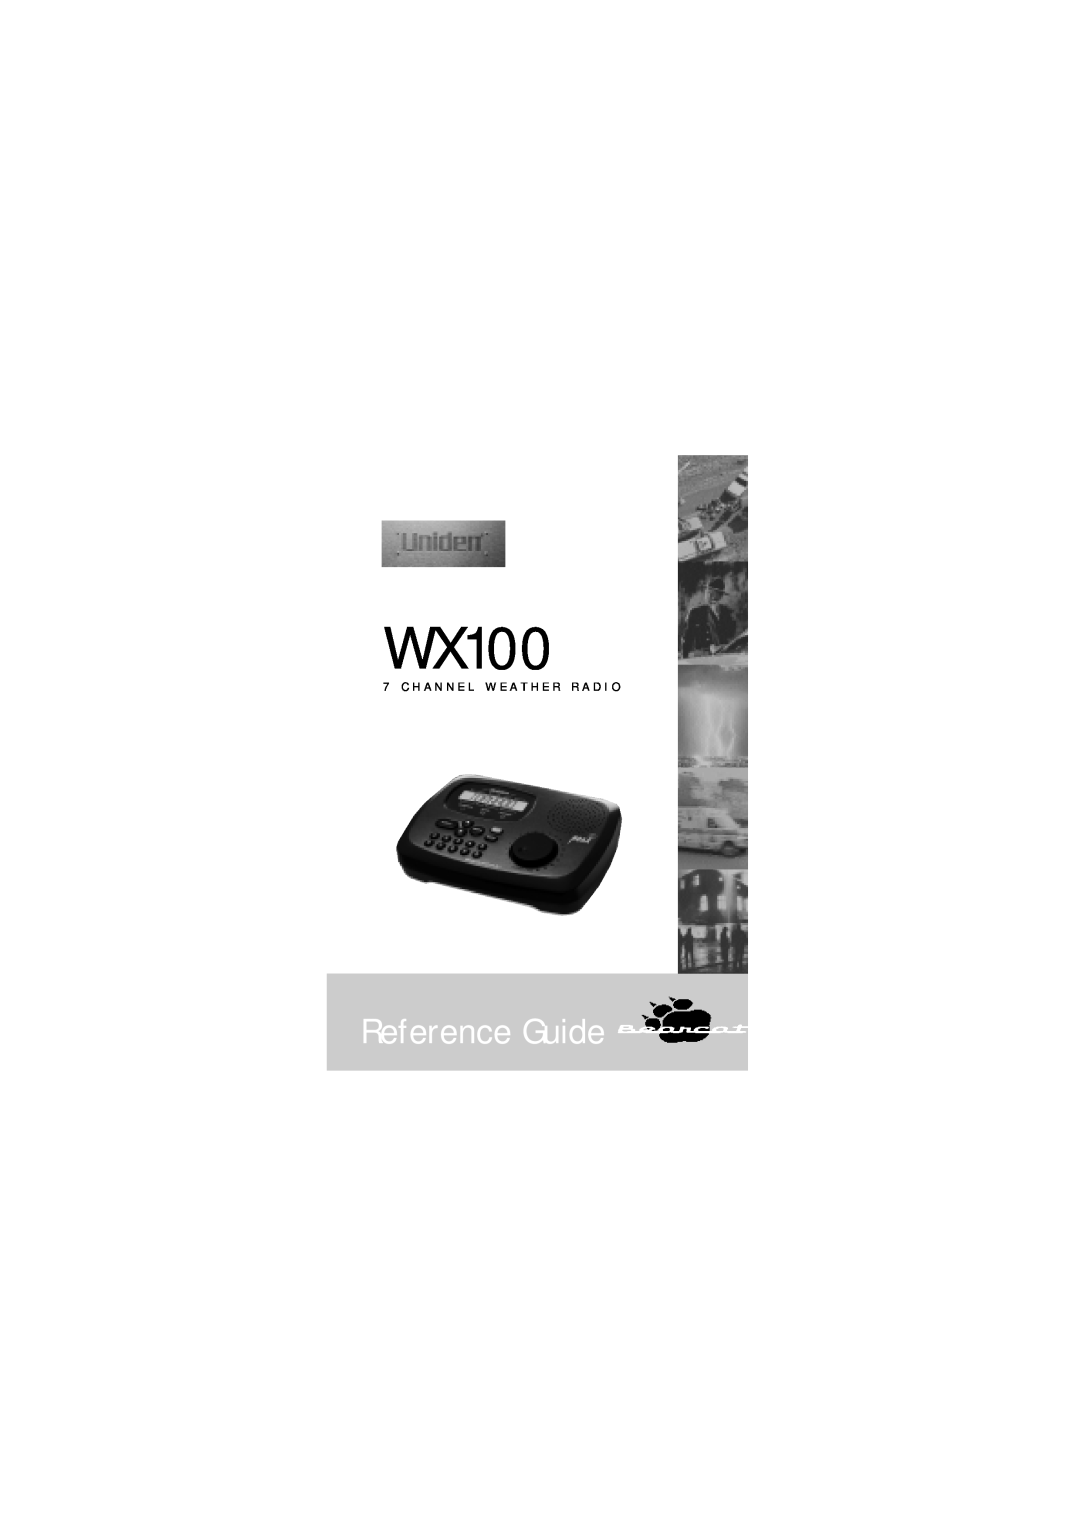 Uniden WX100 manual Reference Guide, C H A N N E L W E A T H E R R A D I O 